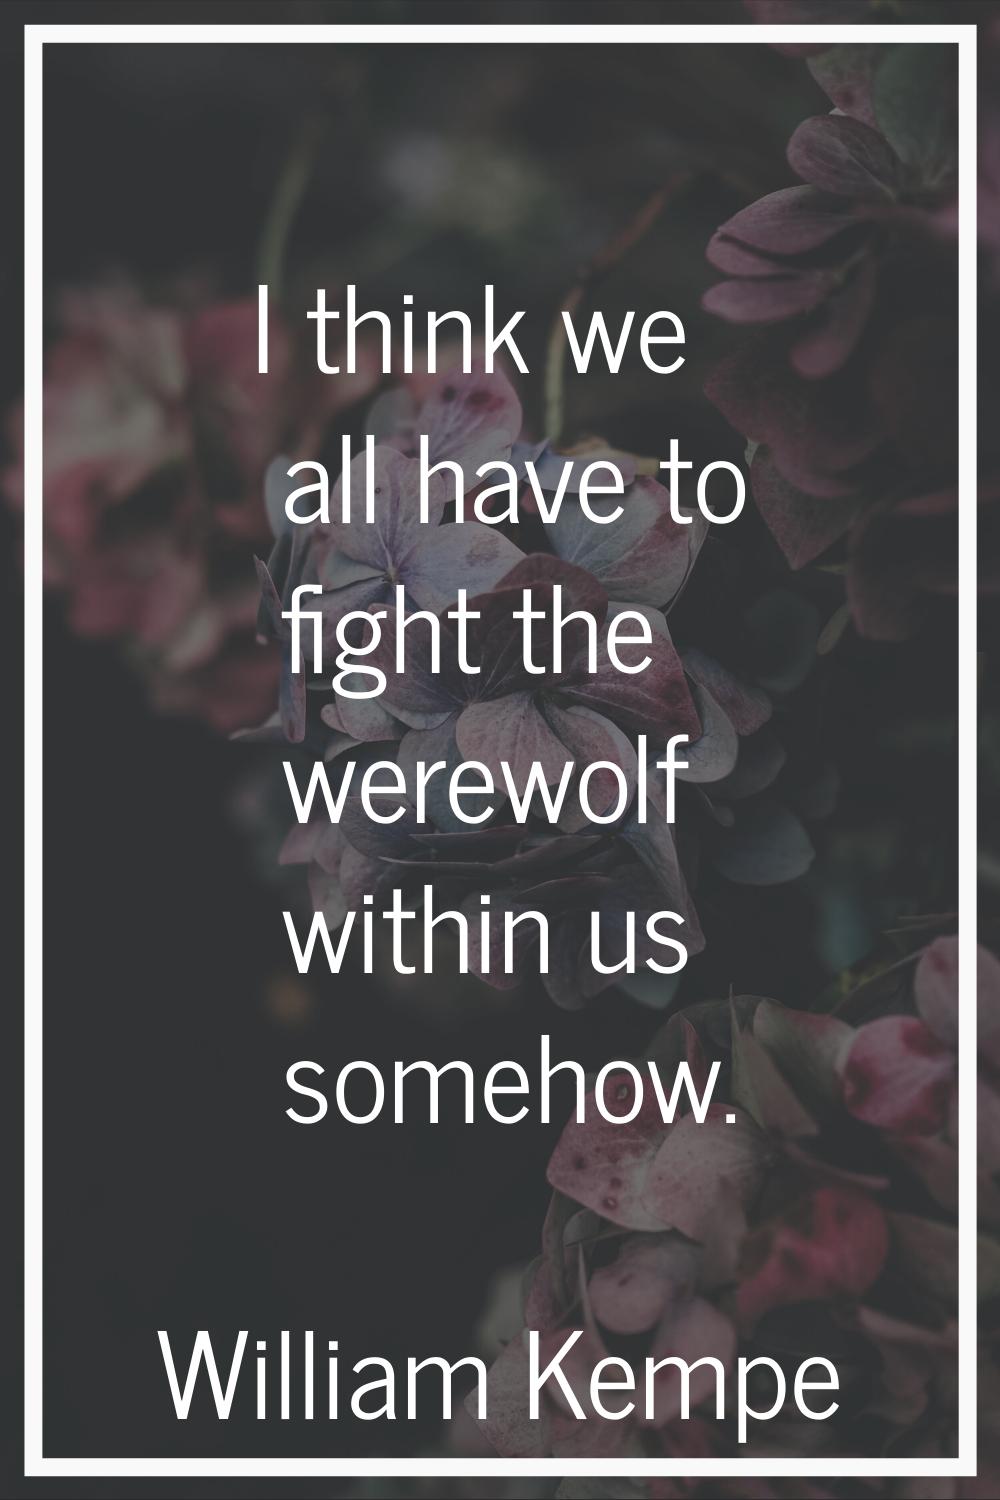 I think we all have to fight the werewolf within us somehow.